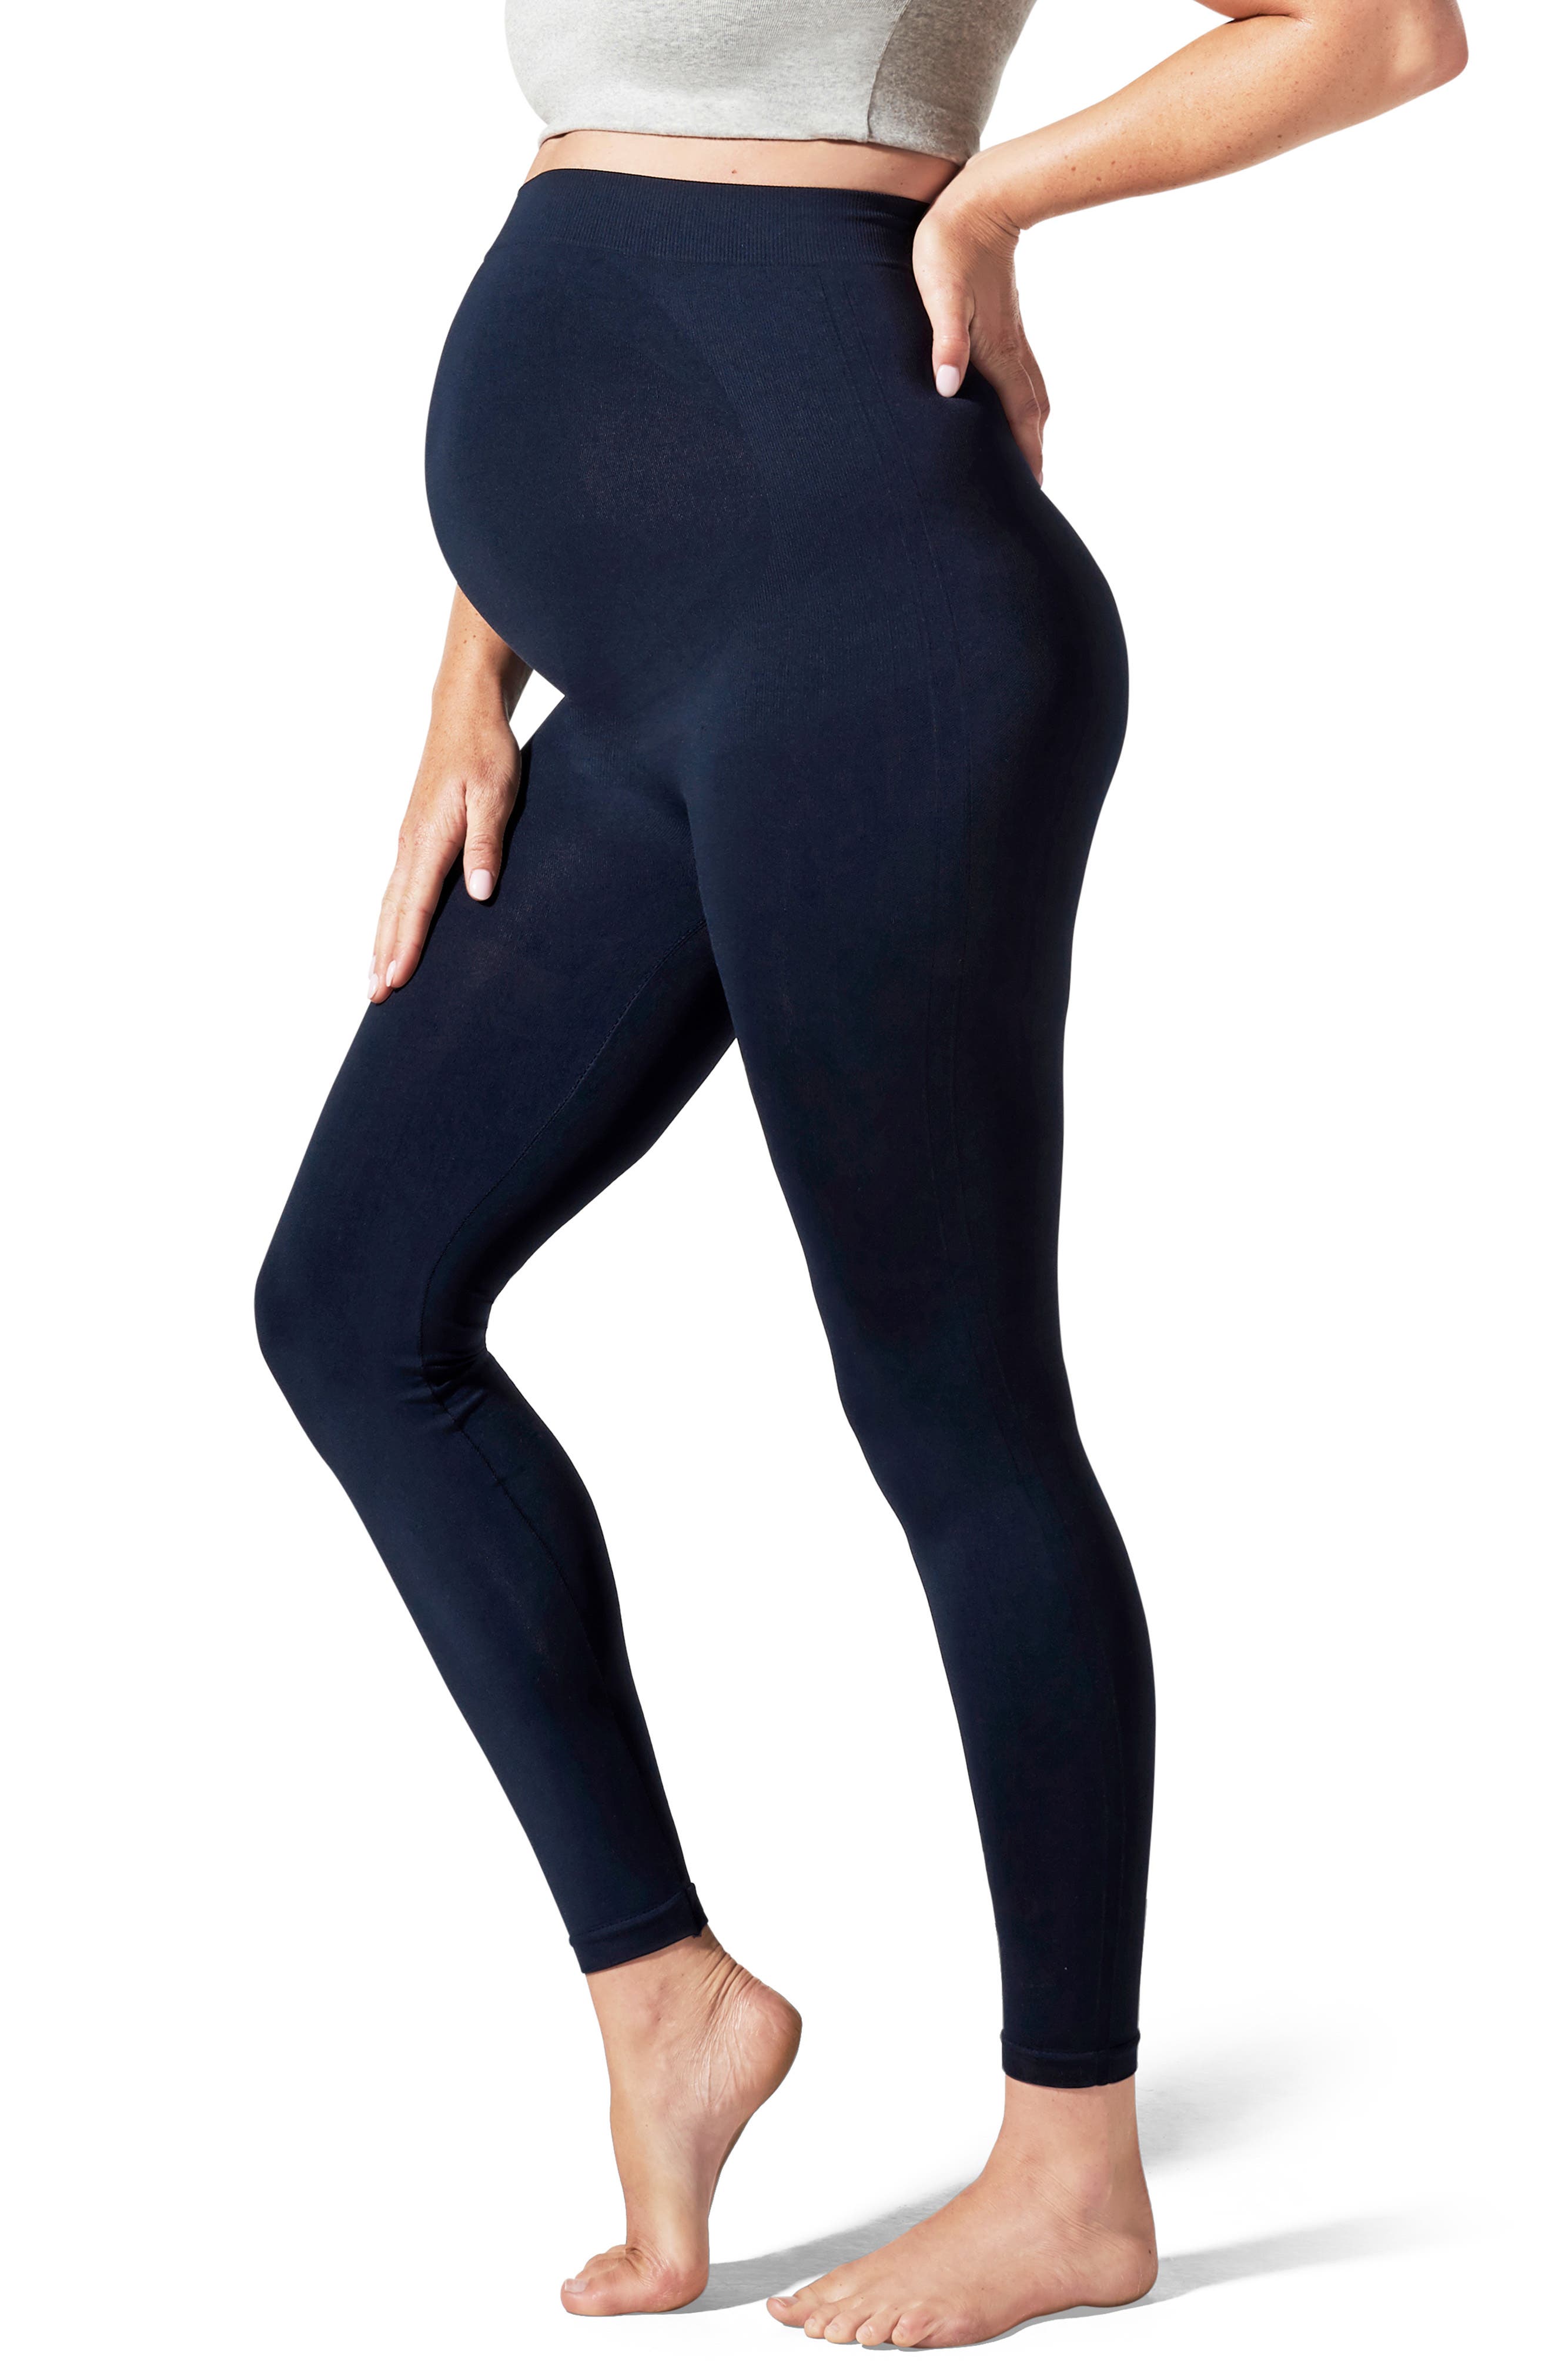 Women Casual Warm Pregnancy Leggings Support Belly Pants Maternity Trousers